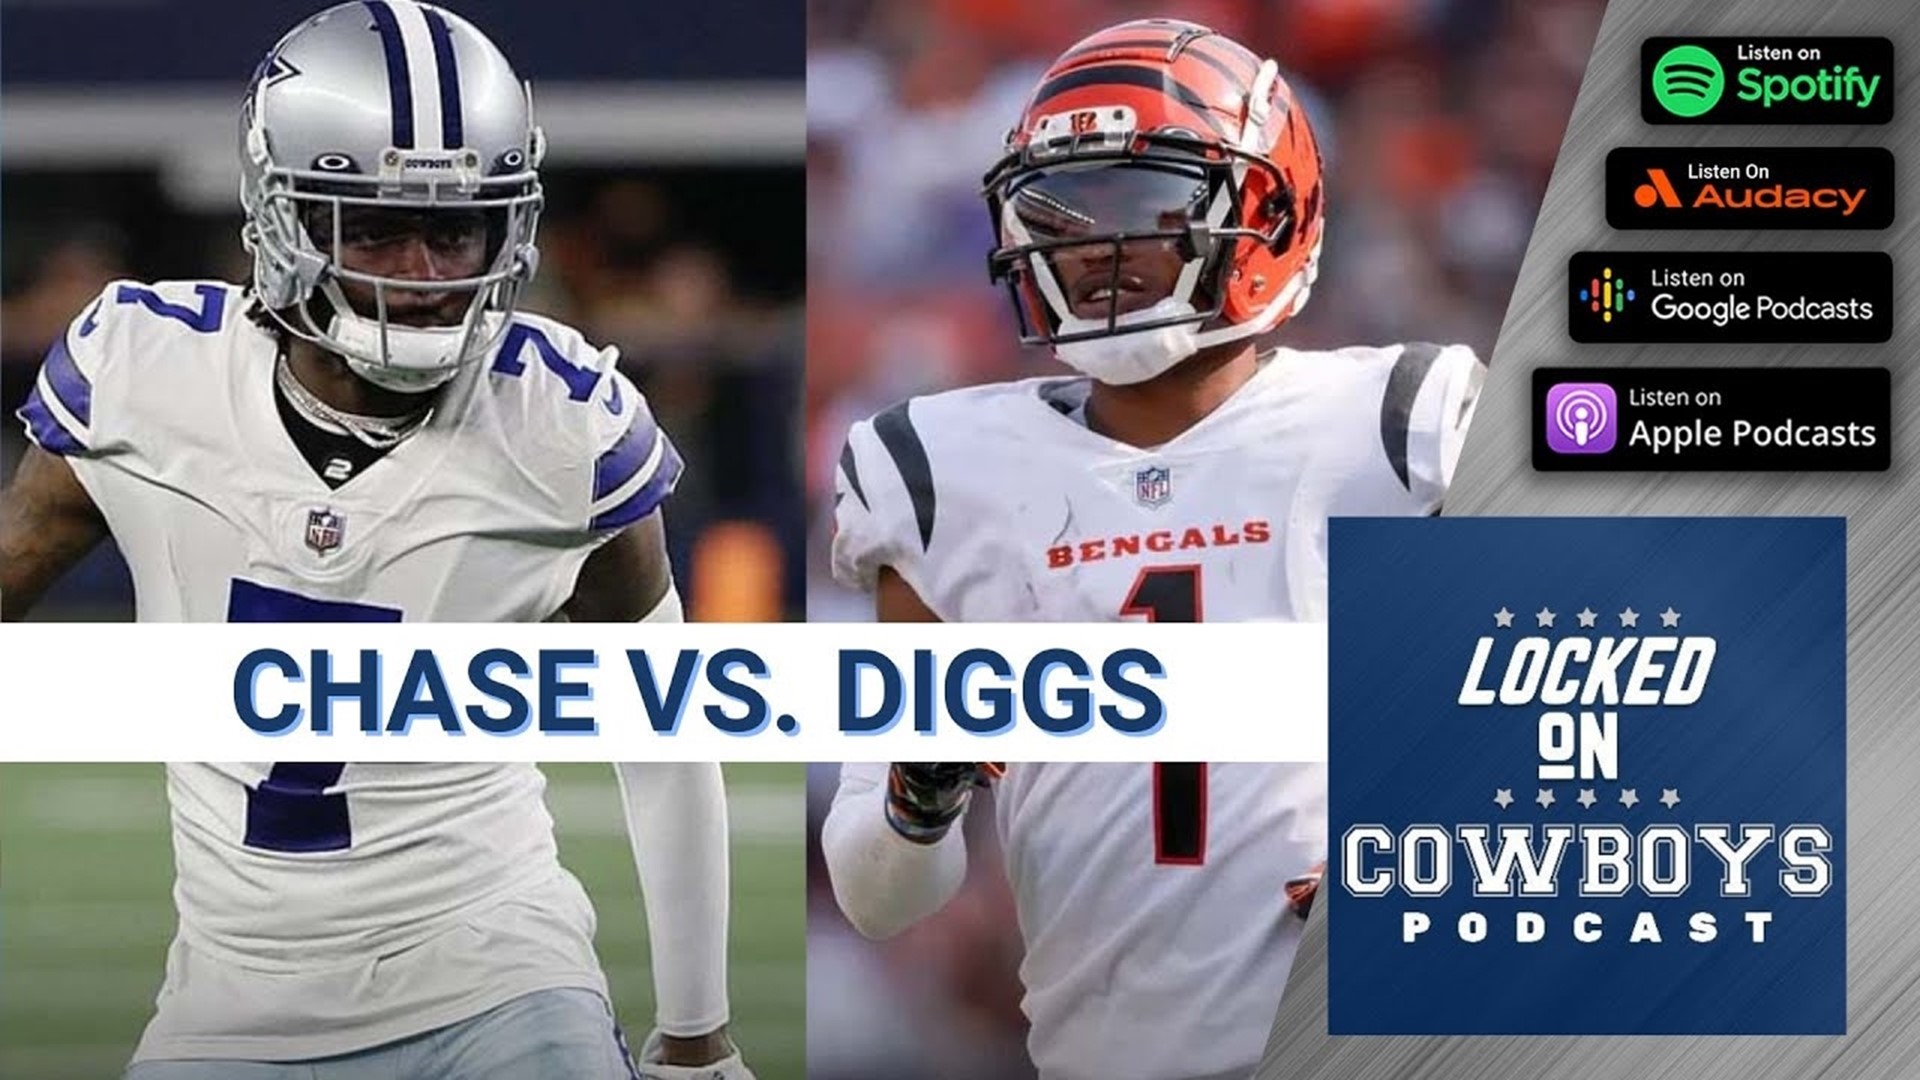 Marcus Mosher of Locked On Cowboys is joined by Jake Liscow and James Rapien of Locked On Bengals to preview the Week 2 matchup between the Cowboys and Bengals.